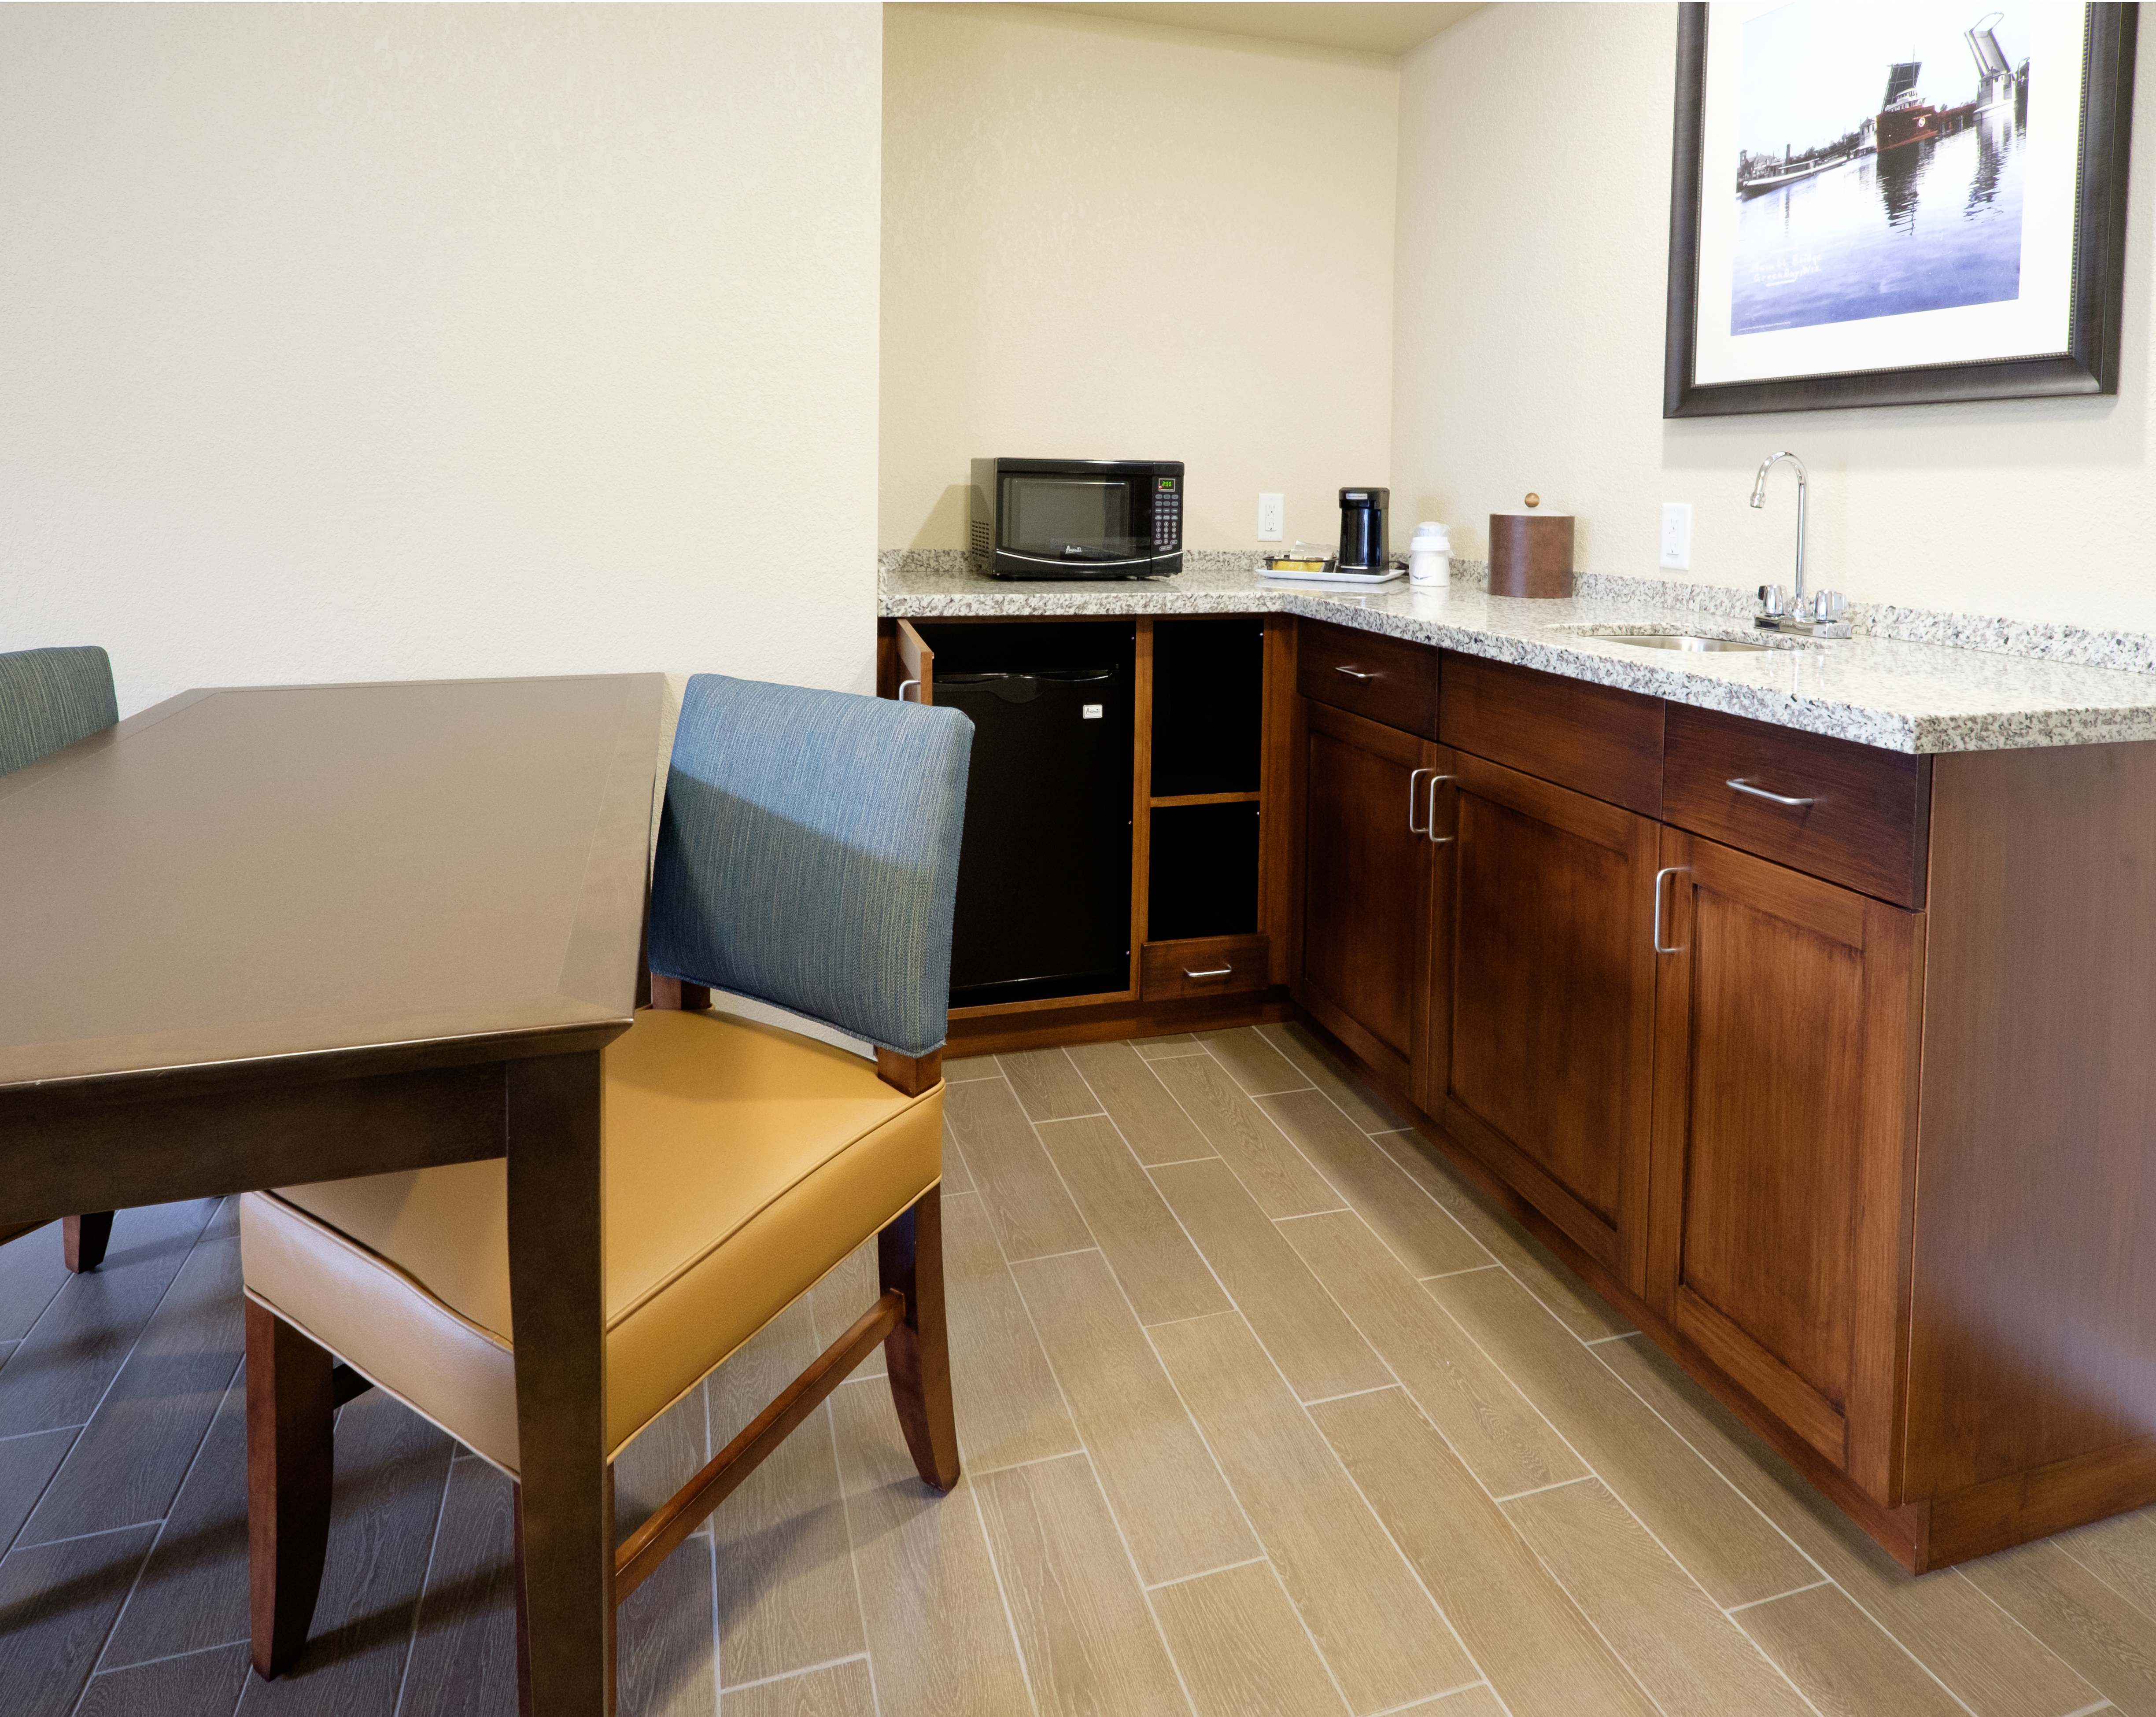 Guest Suite Wet Bar, Chair and Table